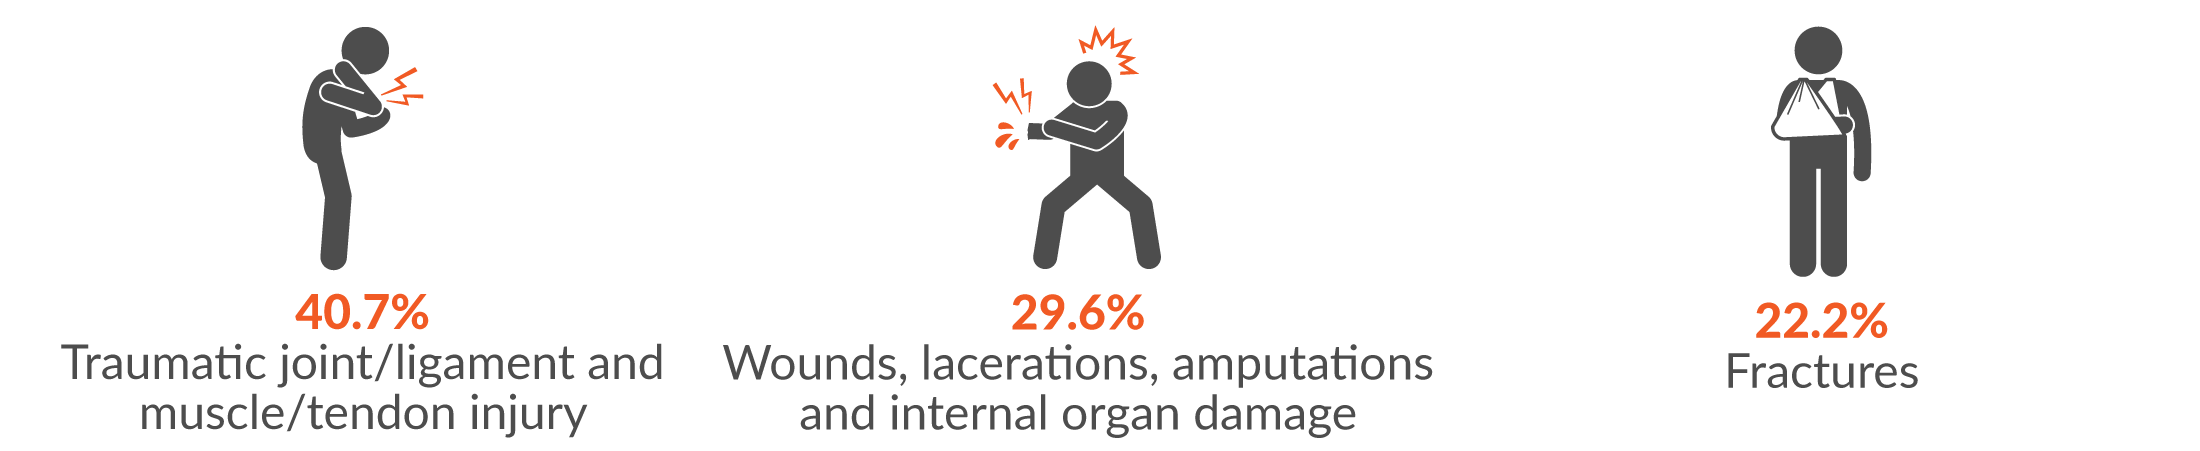 40.7% traumatic joint/ligament and muscle/tendon injury; 29.6% wounds, lacerations, amputations and internal organ damage, and 22.2% fractures.